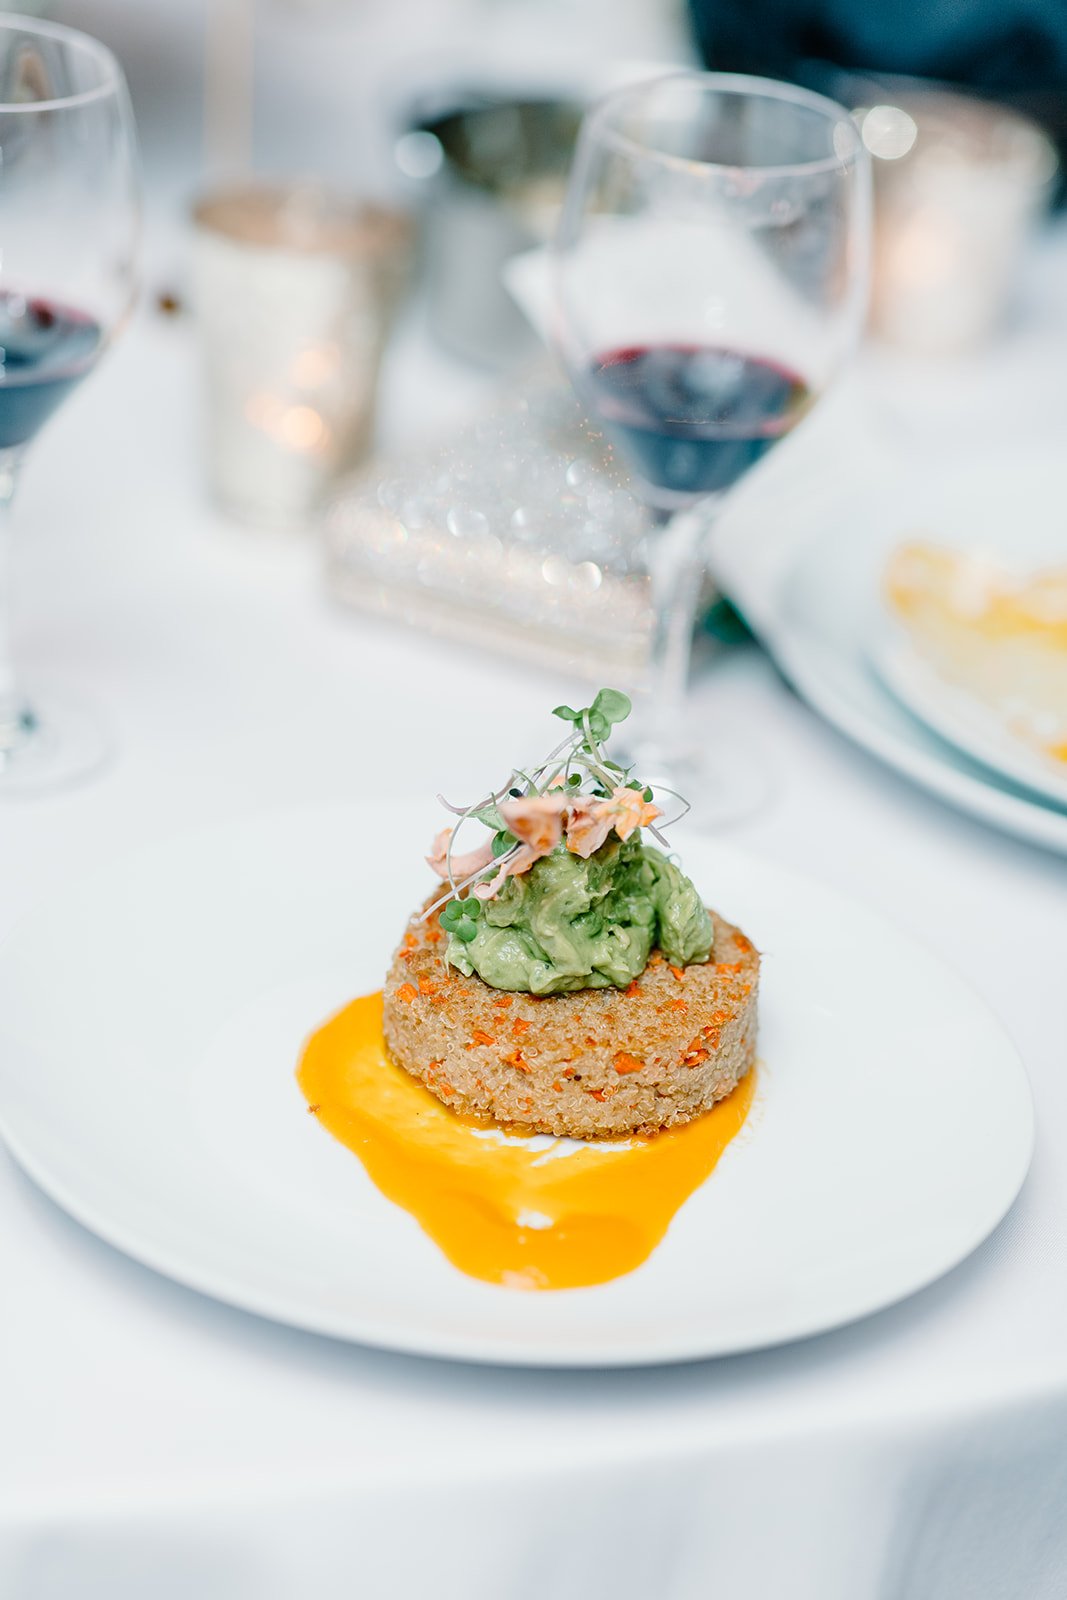 Looking for something healthy and delicious for dinner as we head into the summer season? Look not further than our vegan Quinoa Cakes! Served with carrot ginger puree, crispy carrots, avocado relish, and micro greens this dish is prefect for anyone 